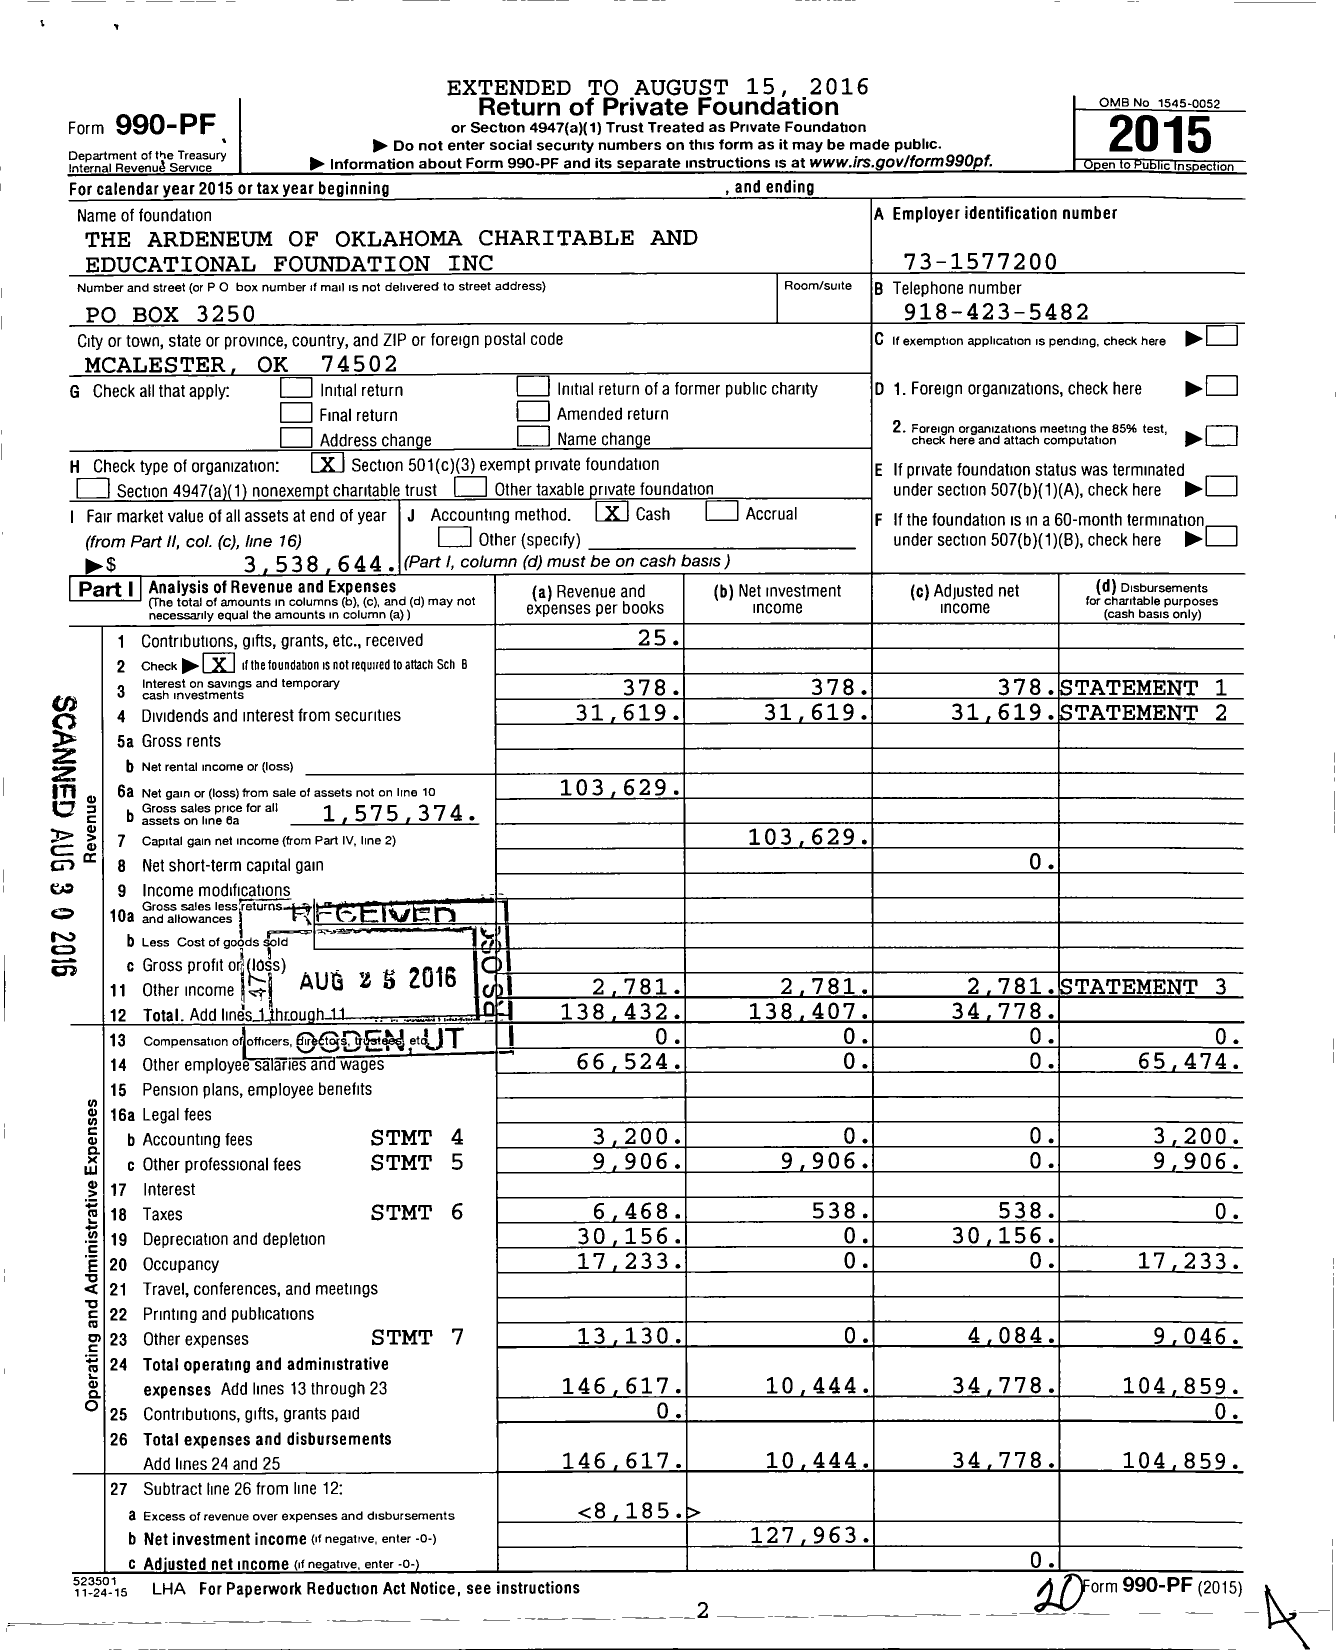 Image of first page of 2015 Form 990PF for The Ardeneum of Oklahoma Charitable and Educational Foundation